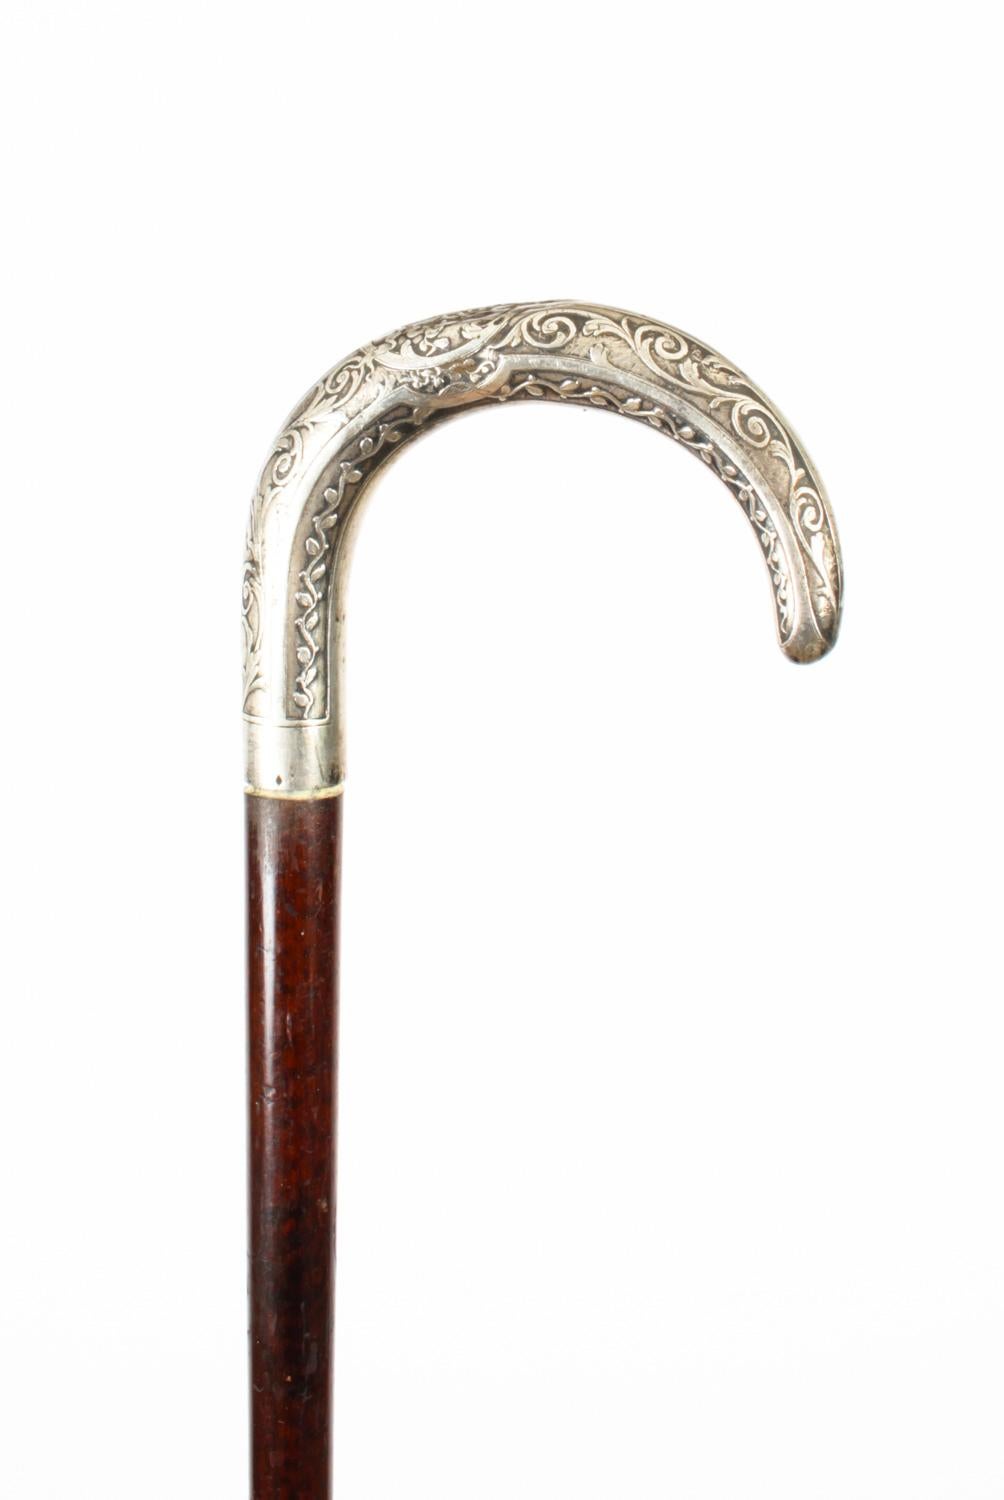 This is a fantastic antique French silver handled and mahogany walking stick, circa 1880 in date.

It has a very decorative silver hook handle decorated with foliate ornamentation which is cast with great attention to detail with a sturdy mahogany